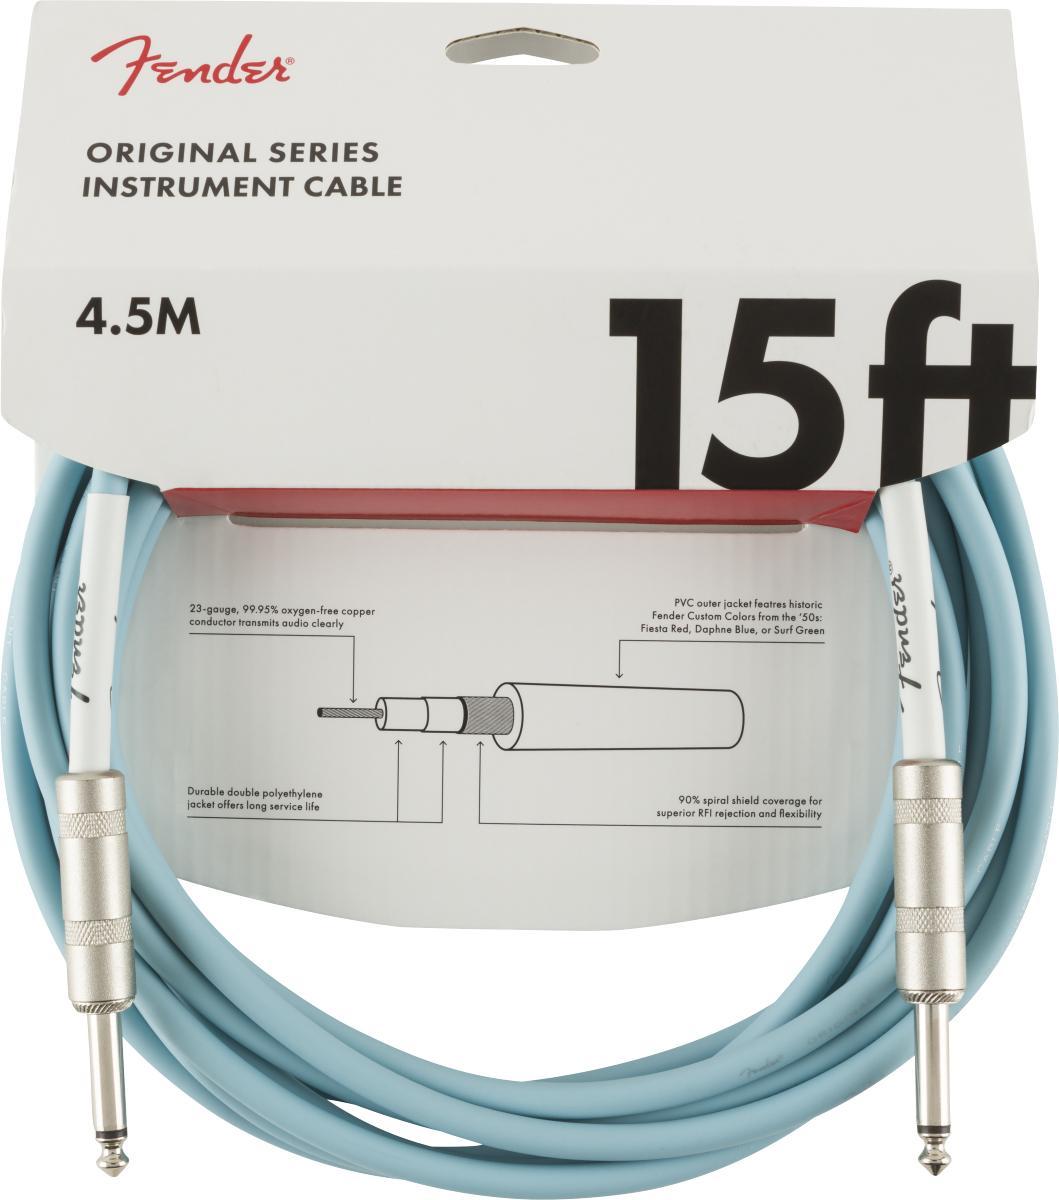 Cable Fender Original Instrument Cable, Straight/Straight, 15ft - Daphne Blue